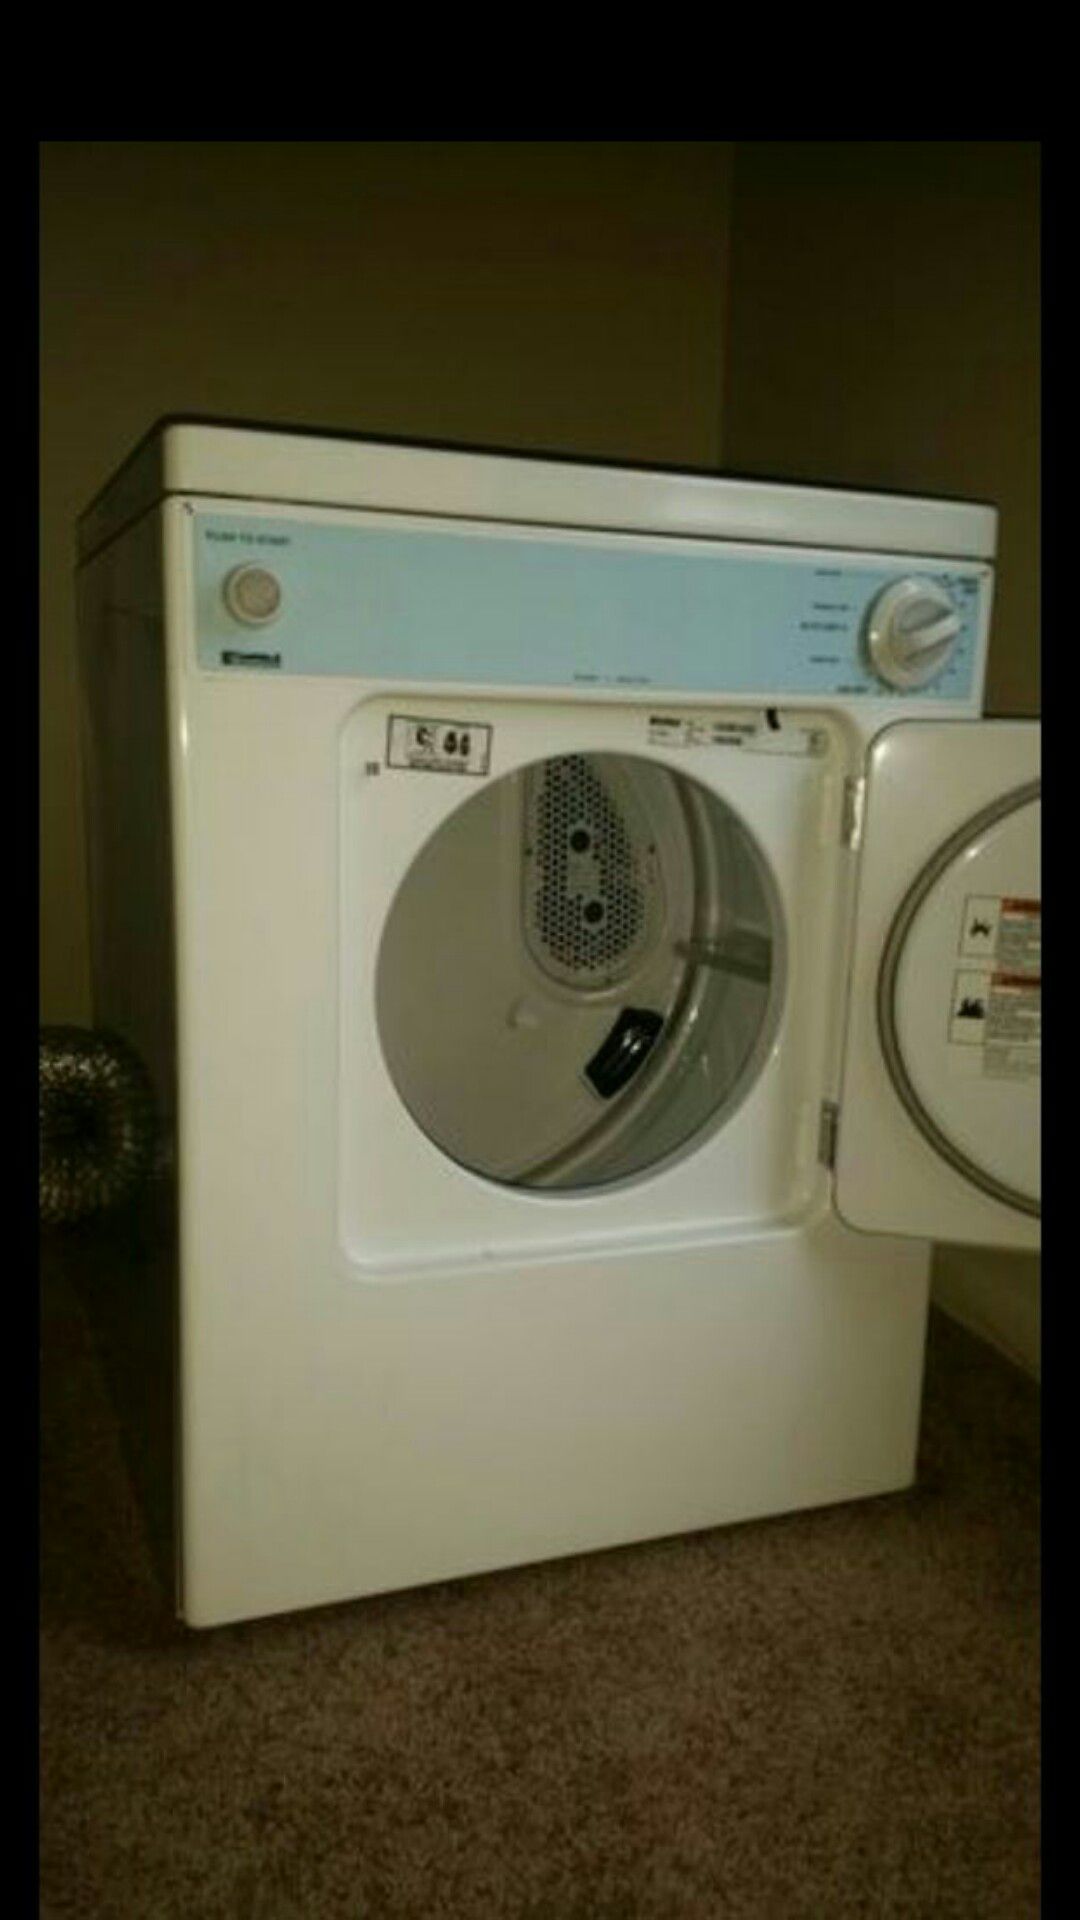 Washer and dryer for indoor 120V can be plugged in in any outlet